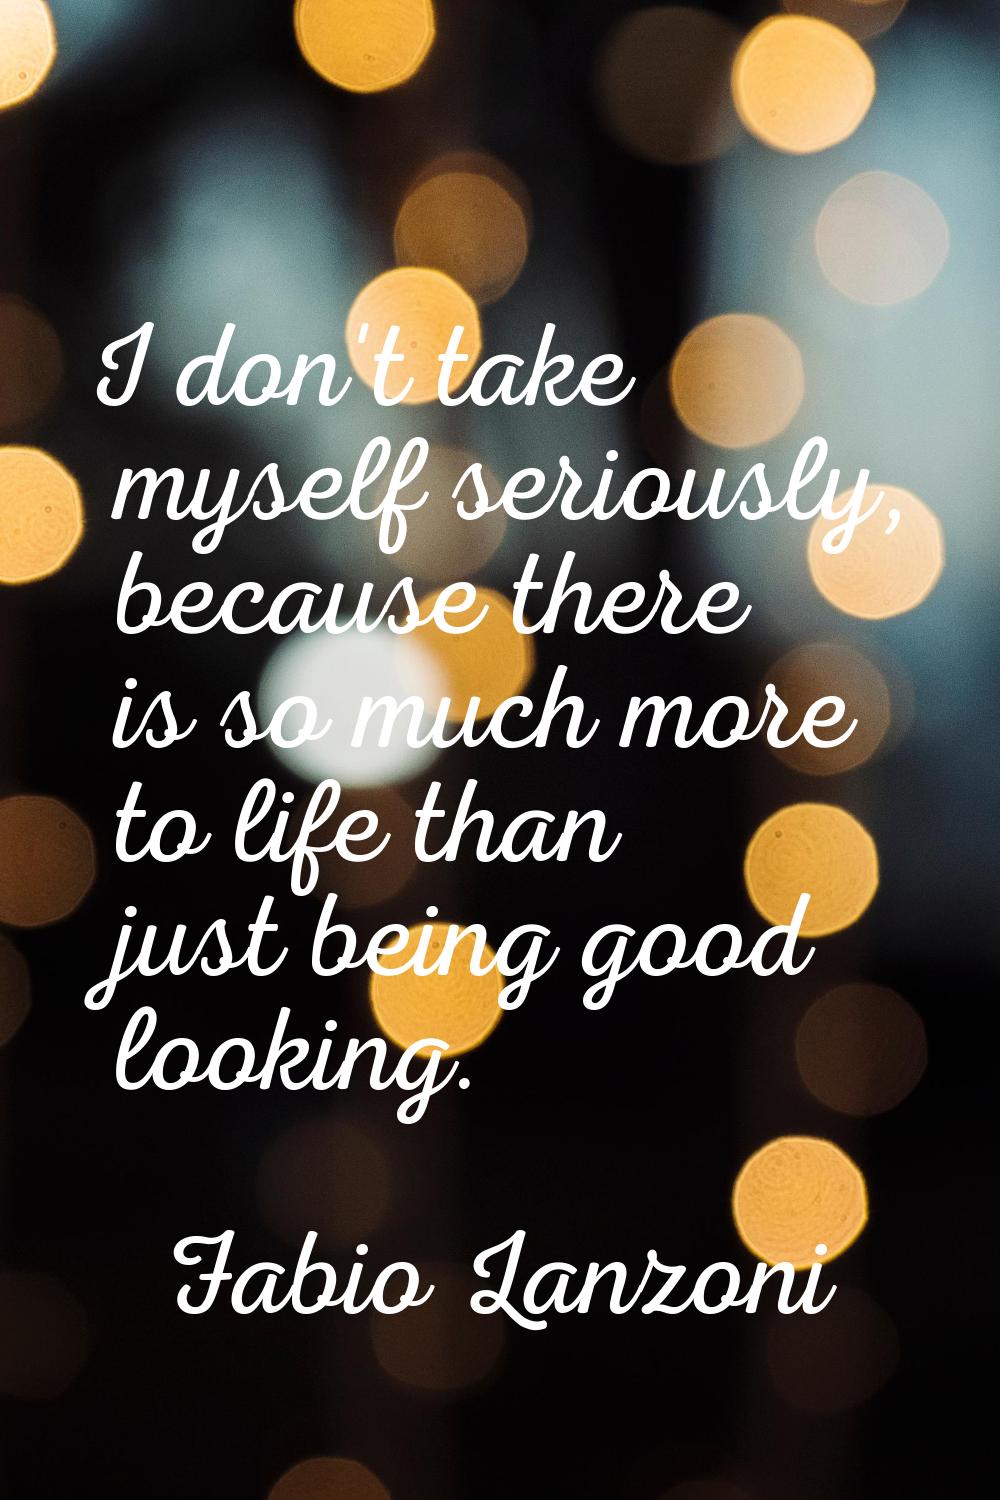 I don't take myself seriously, because there is so much more to life than just being good looking.